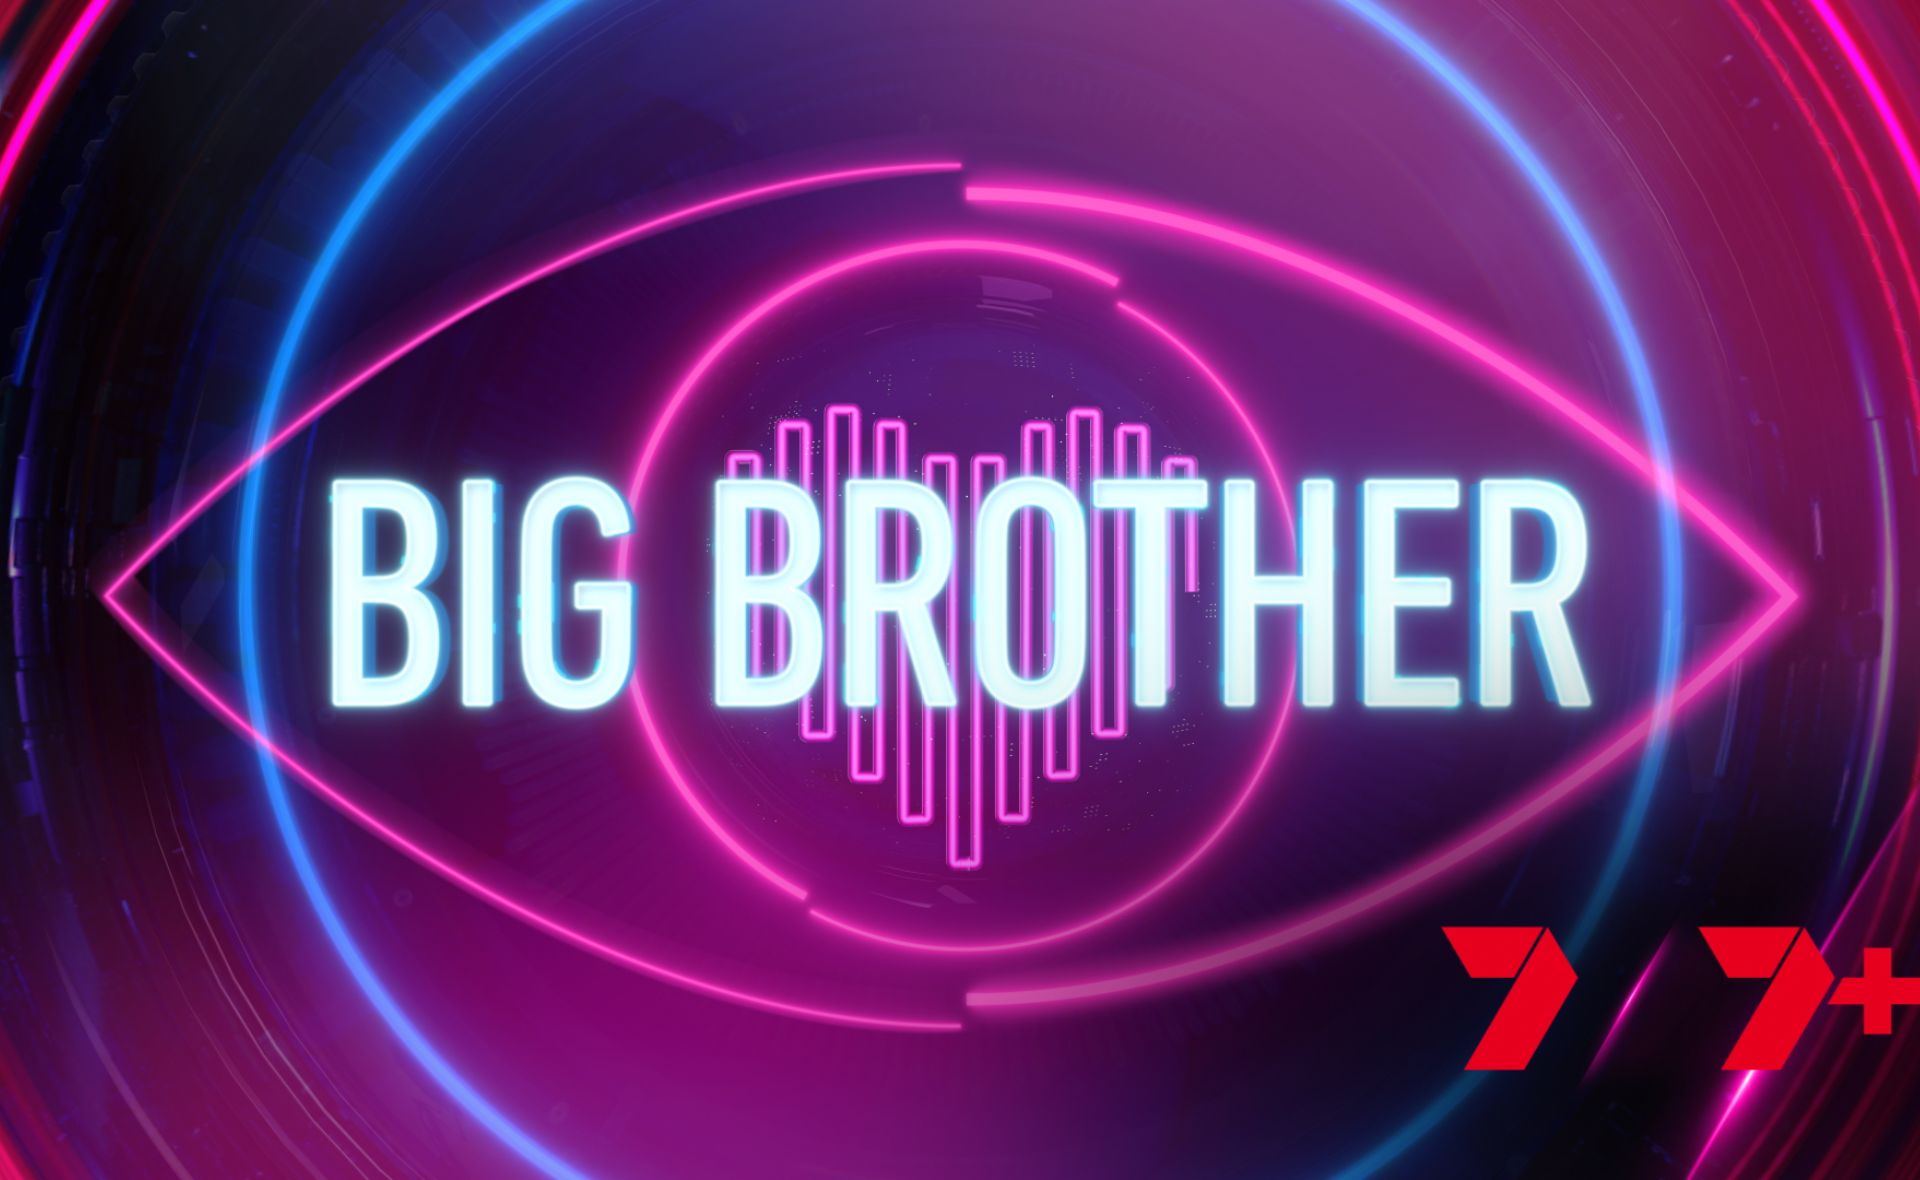 Fans have already revealed their favourites to win Big Brother 2023